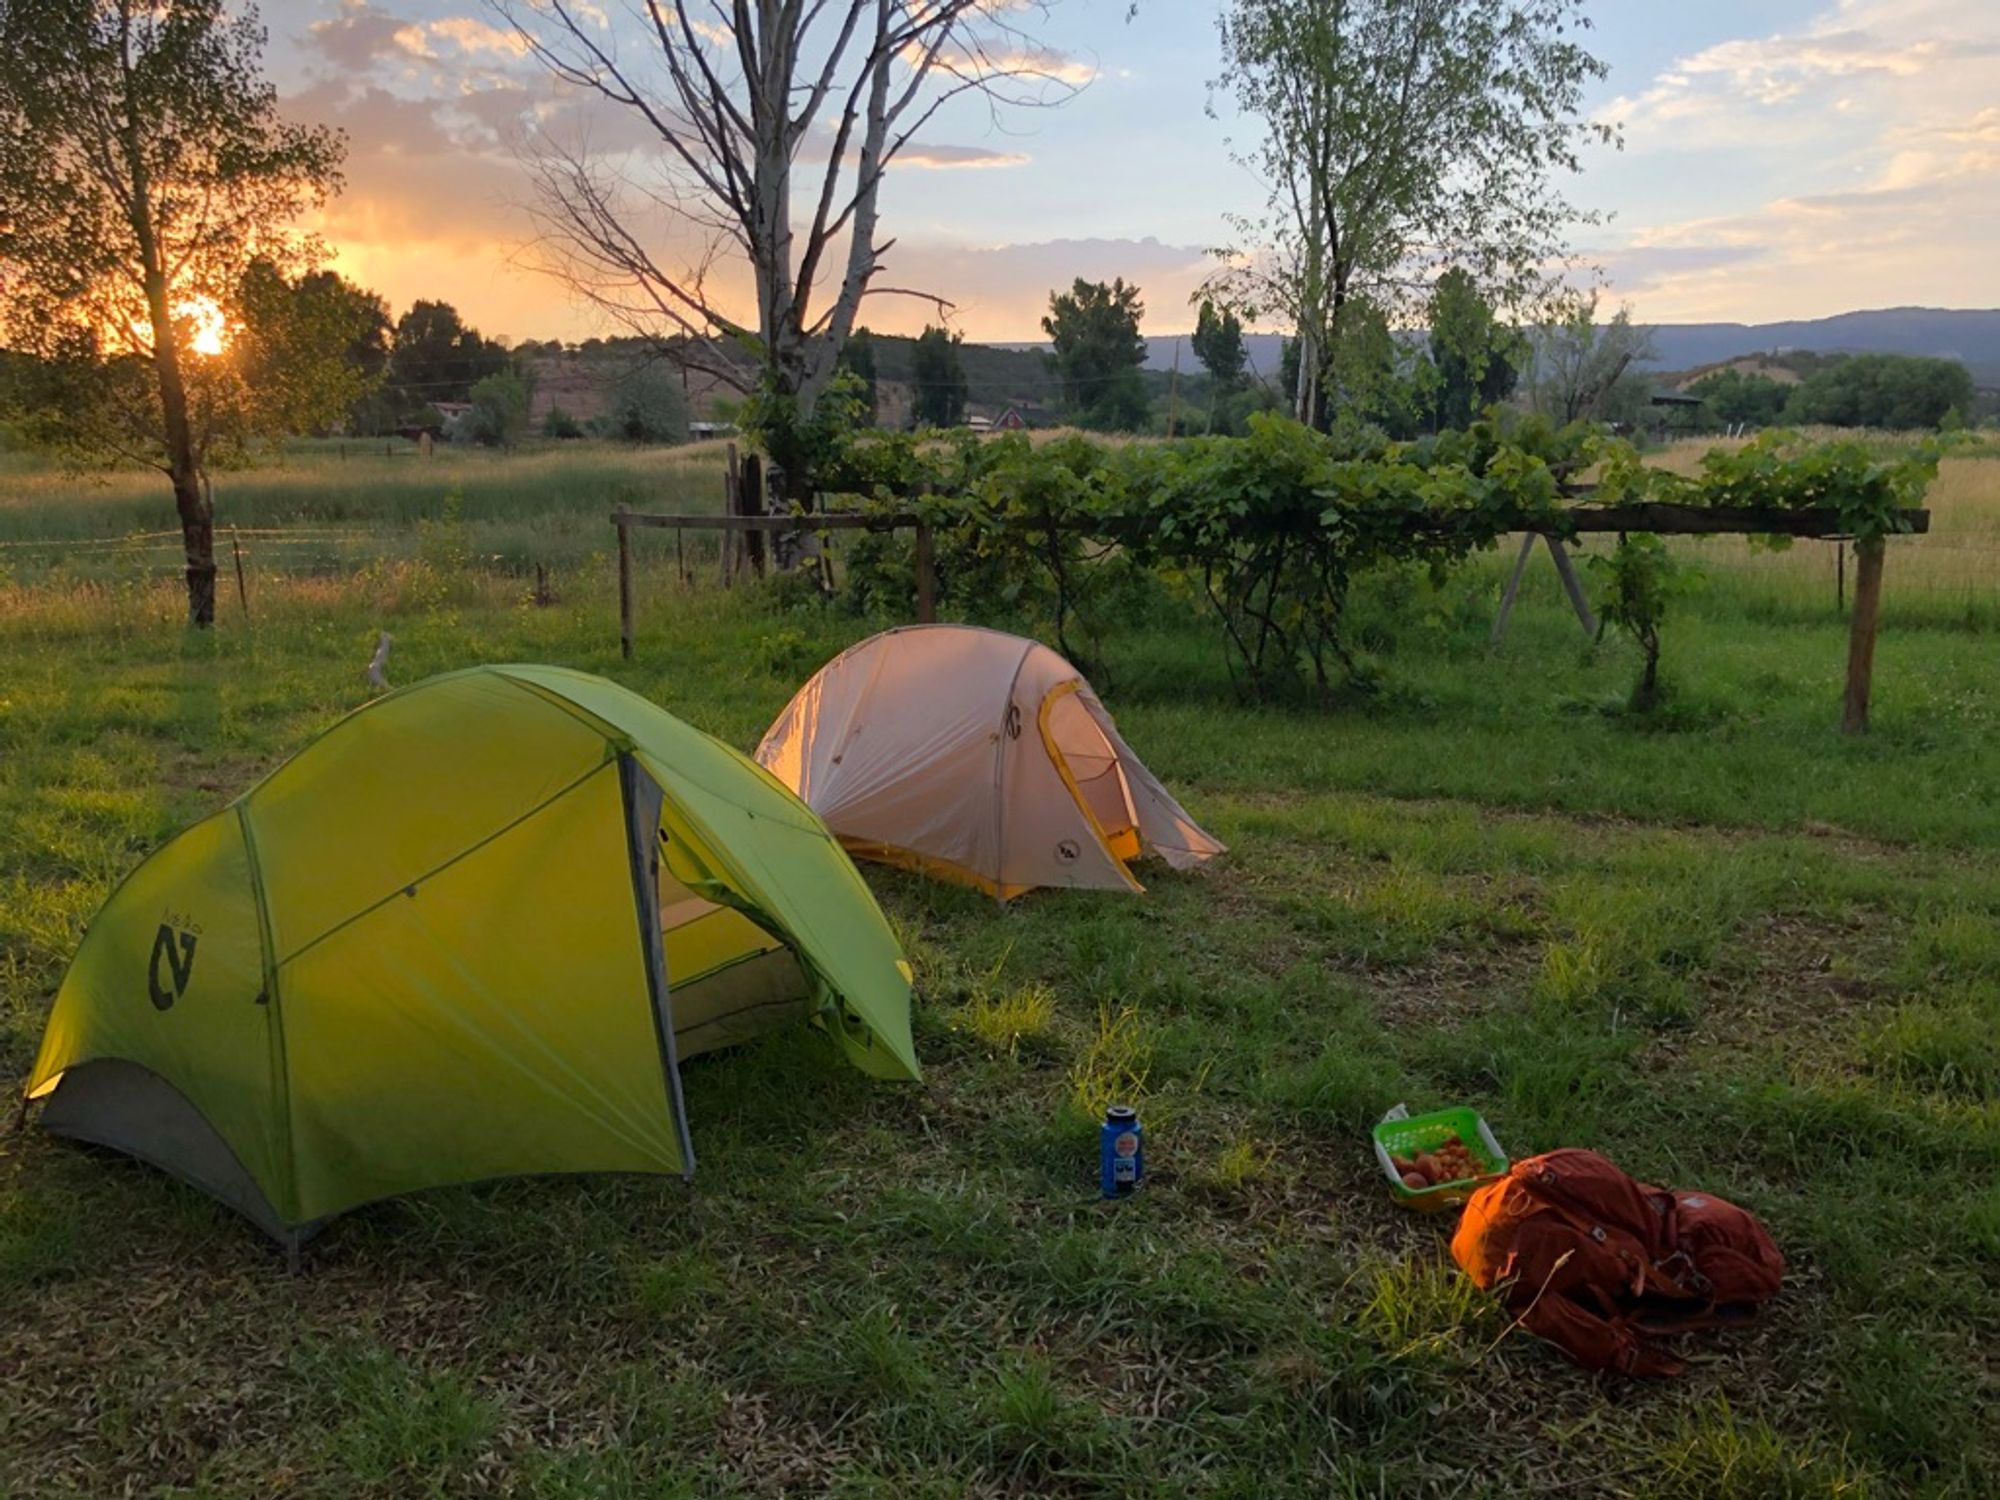 Our two tents on a lush, green farm with the sun setting in the background